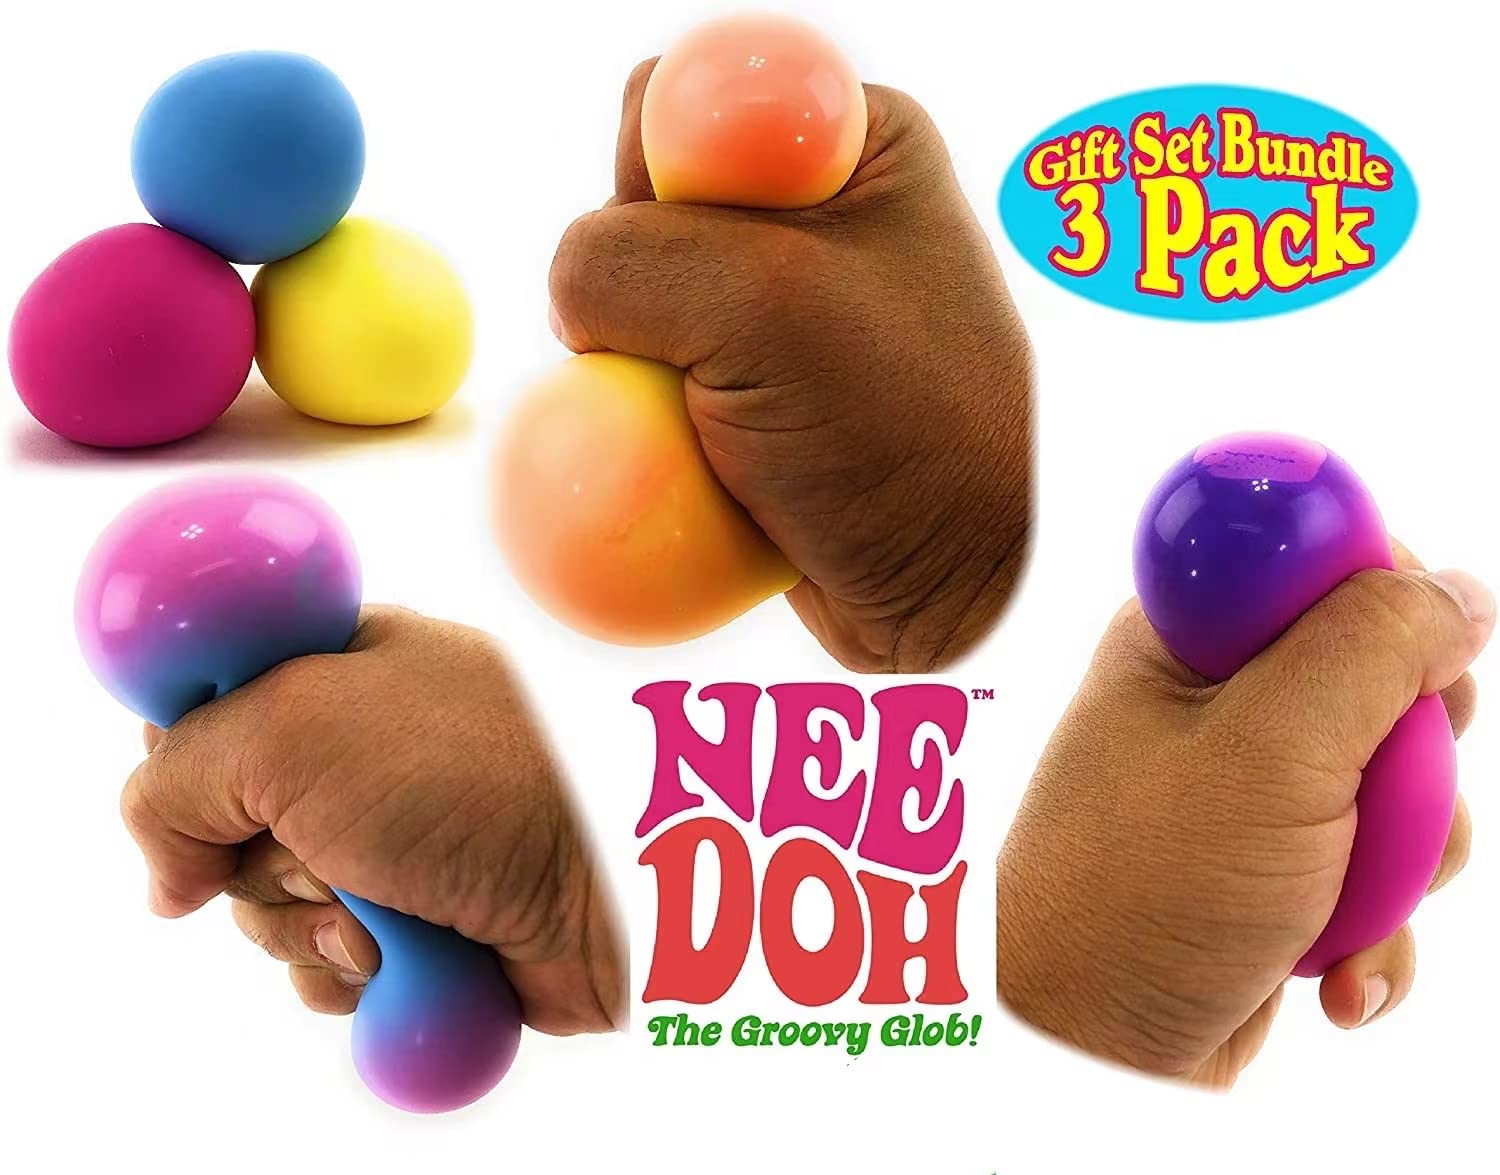 Did You Know About These Giant Nee Doh Balls: The Top 10 Surprisingly Huge Stress Balls You